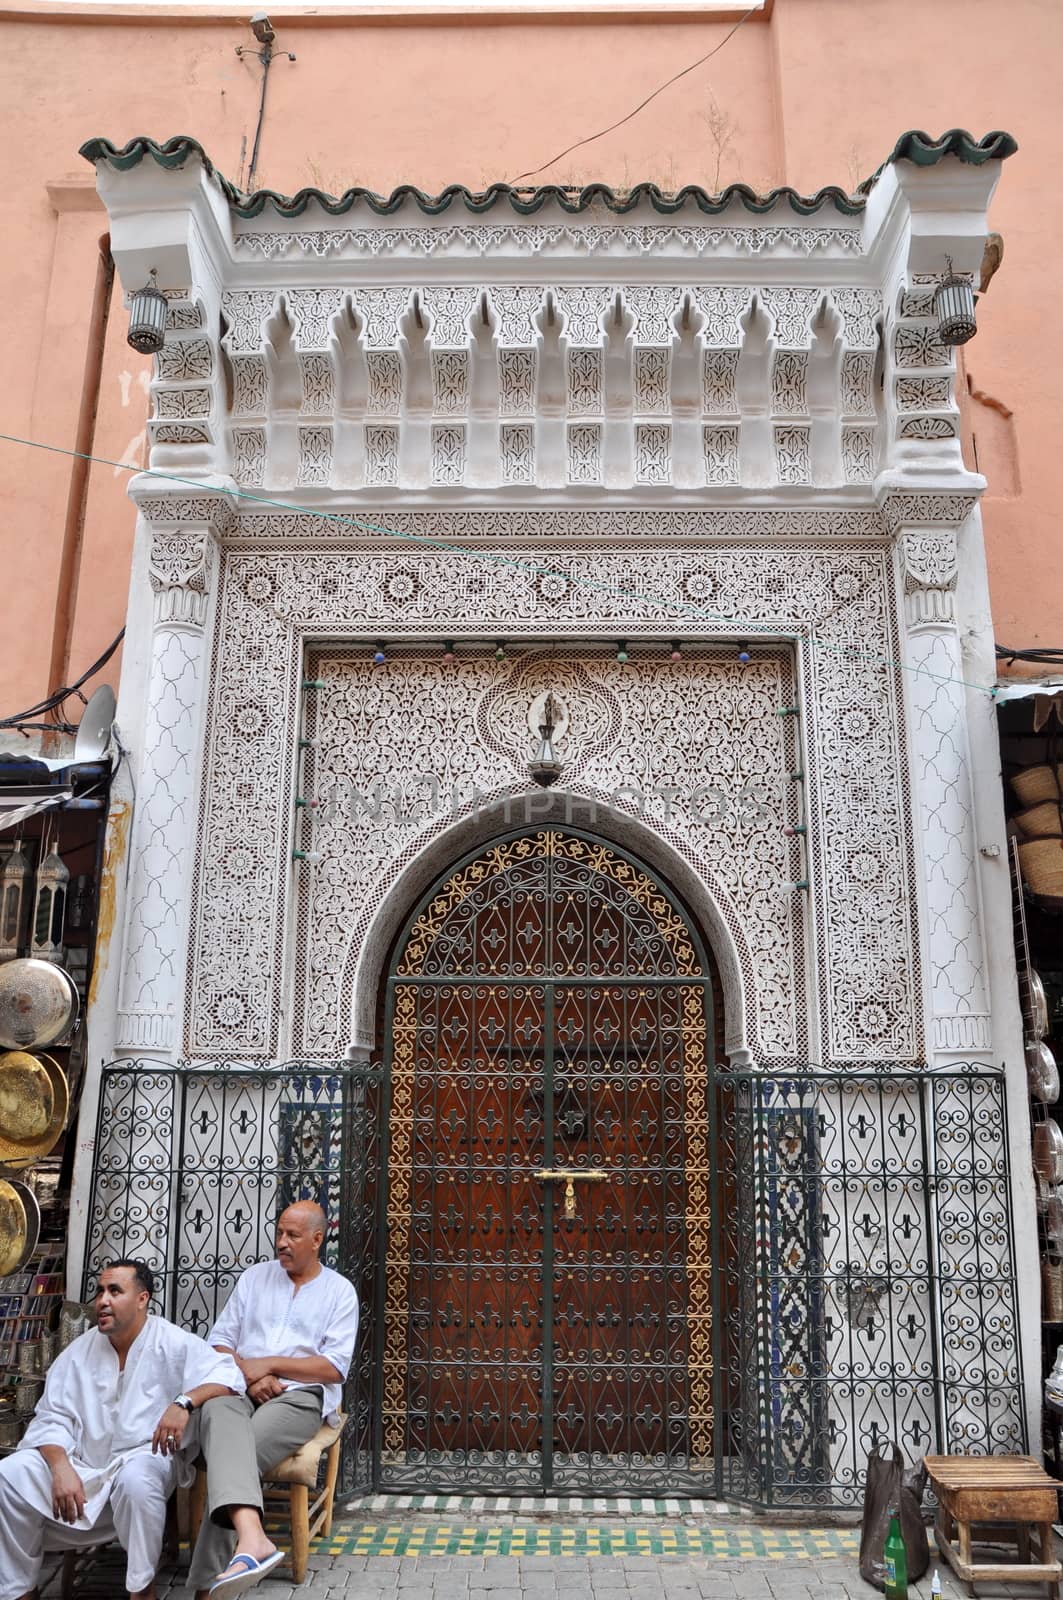 MARRAKECH - SEPTEMBER 23: Local people sitting at a beautiful handmade entrance. In Marrakech, Morocco, September 23, 2013.